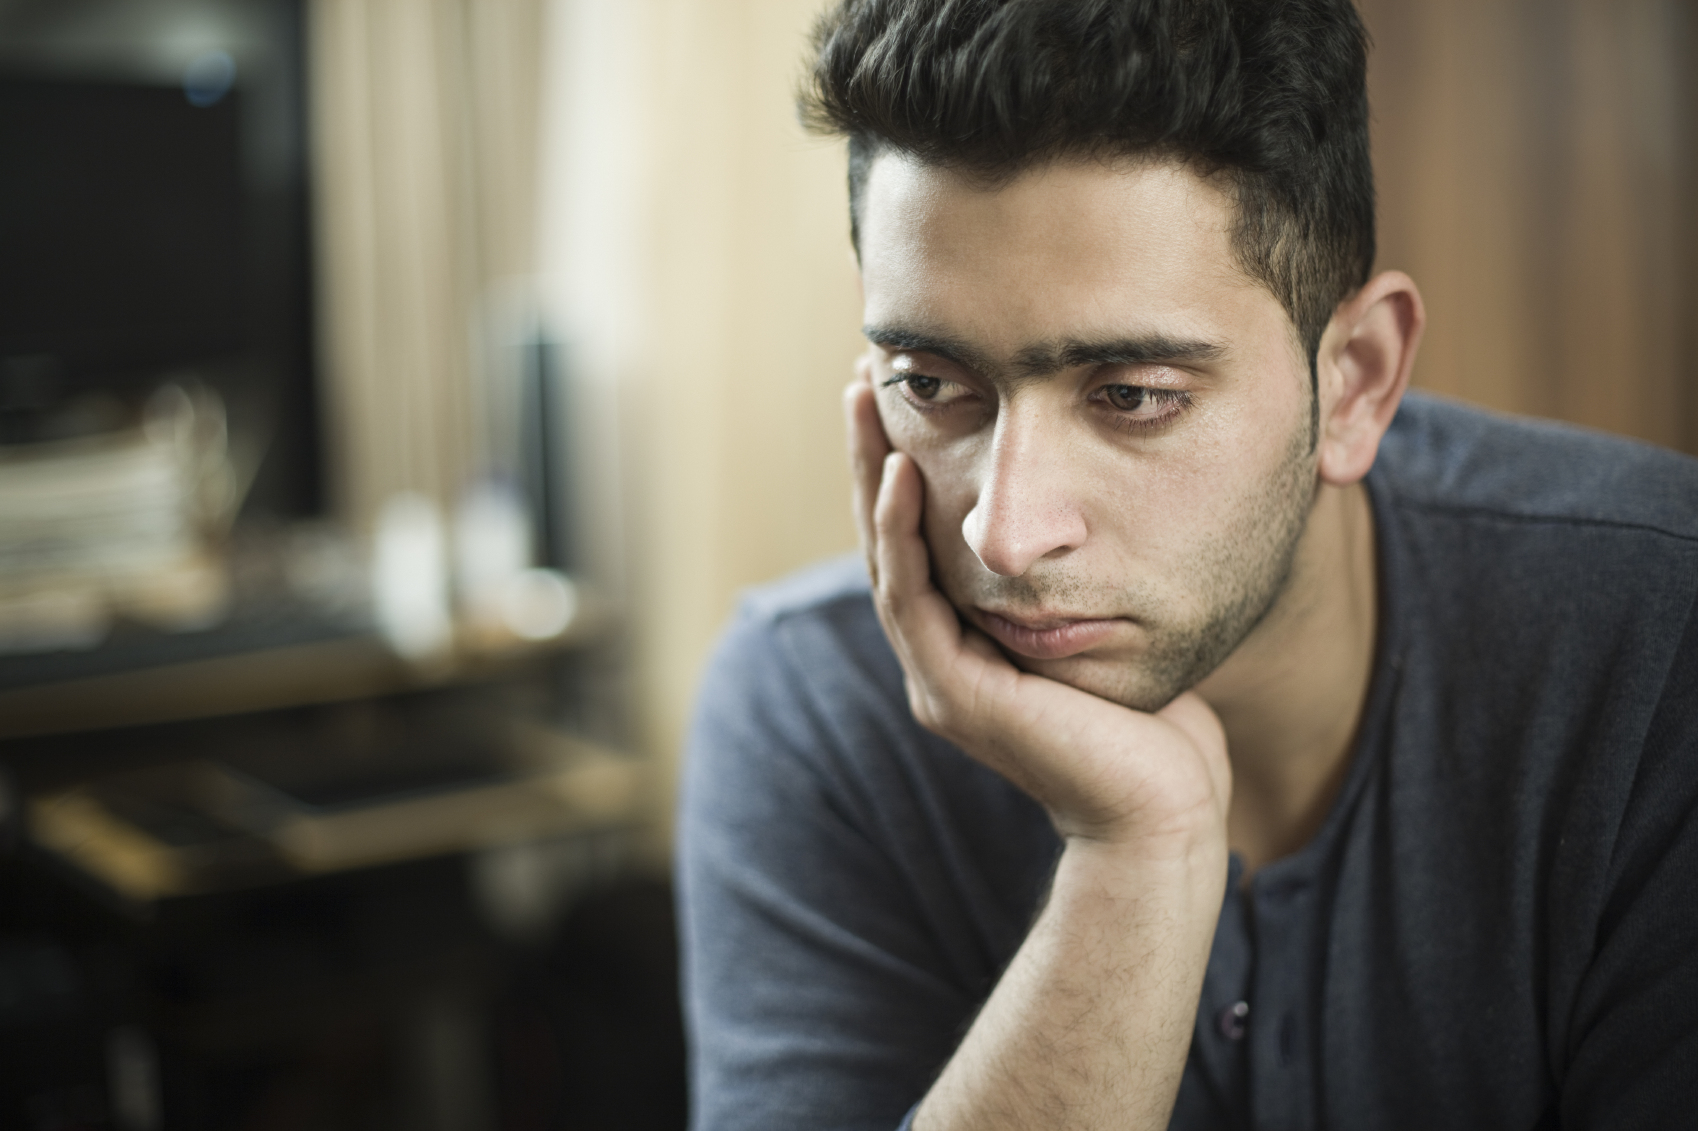 Indoor low key image of a serene young man thinking by resting his head on hand and looking away with and blank expression. He is wearing a t-shirt. One person, waist up, horizontal composition with selective focus and copy space.